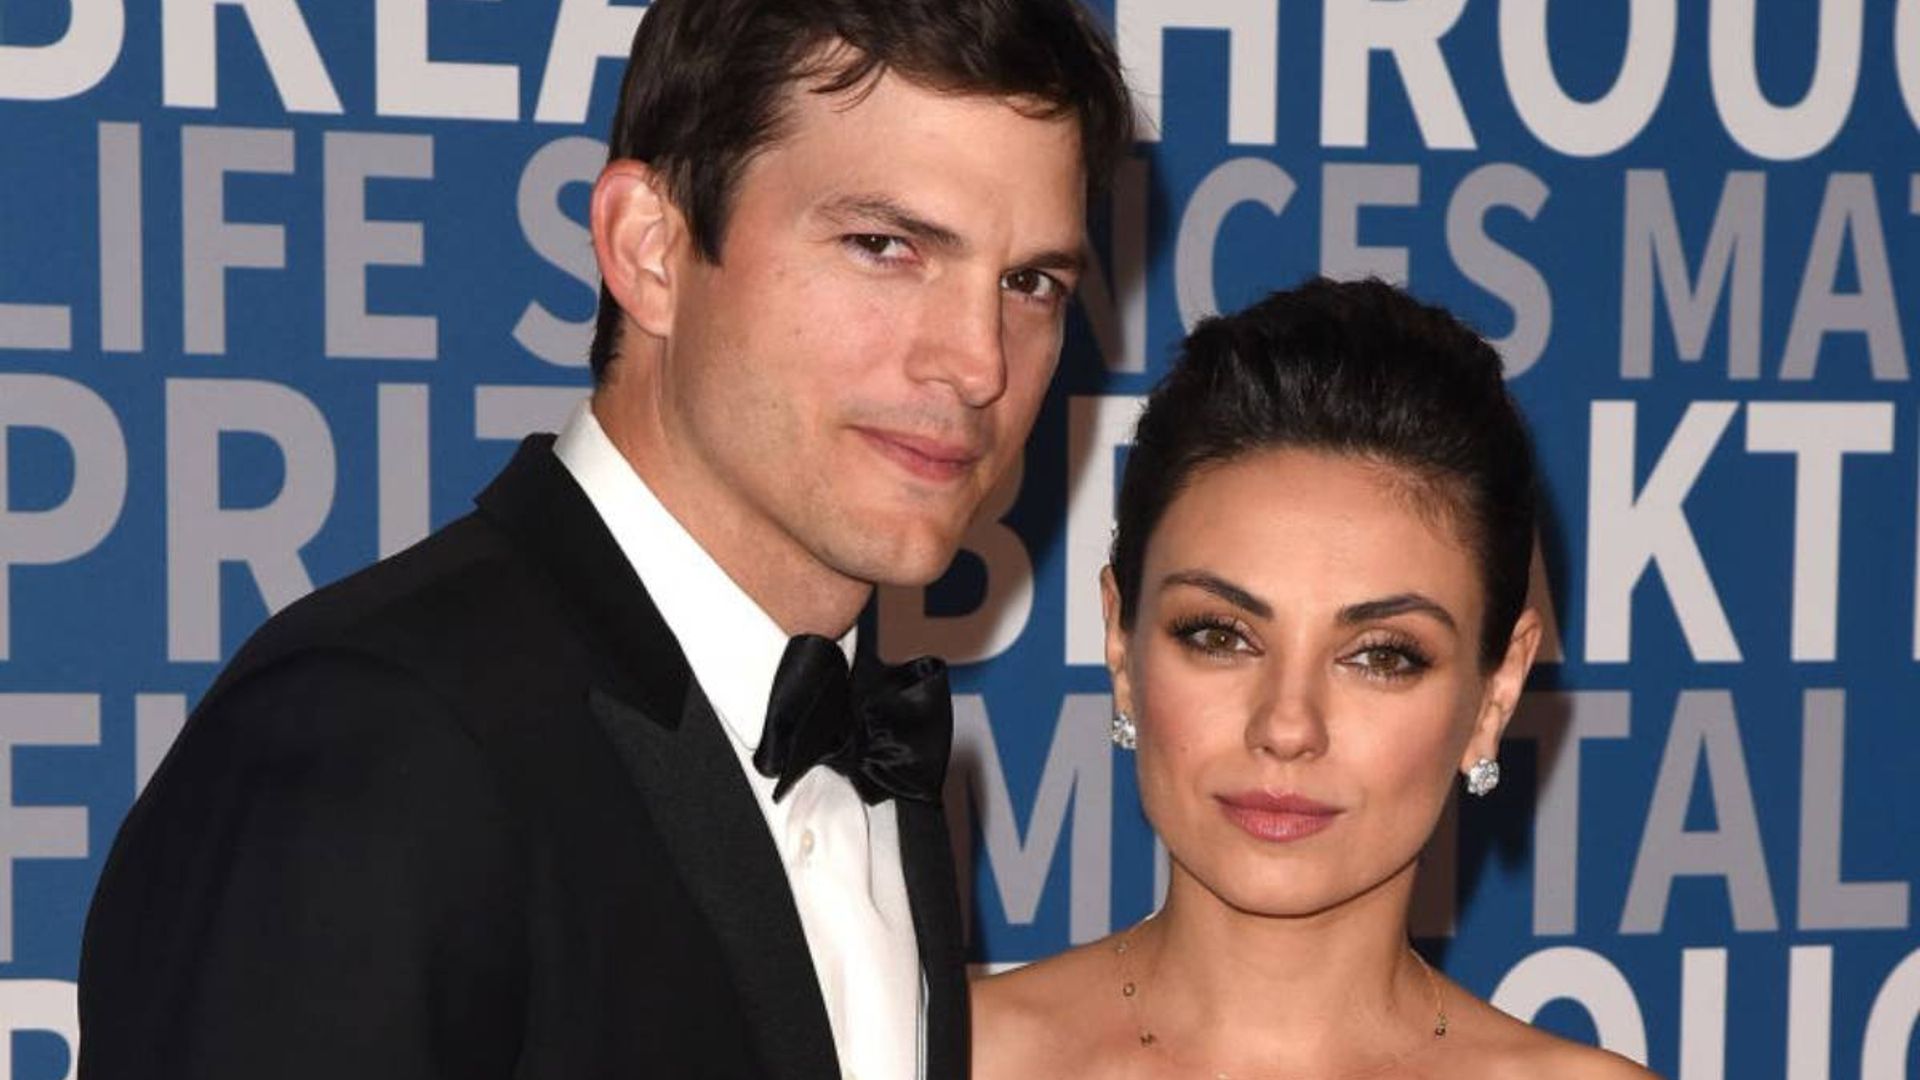 Mila Kunis and Ashton Kutcher address controversial parenting decision with hilarious video